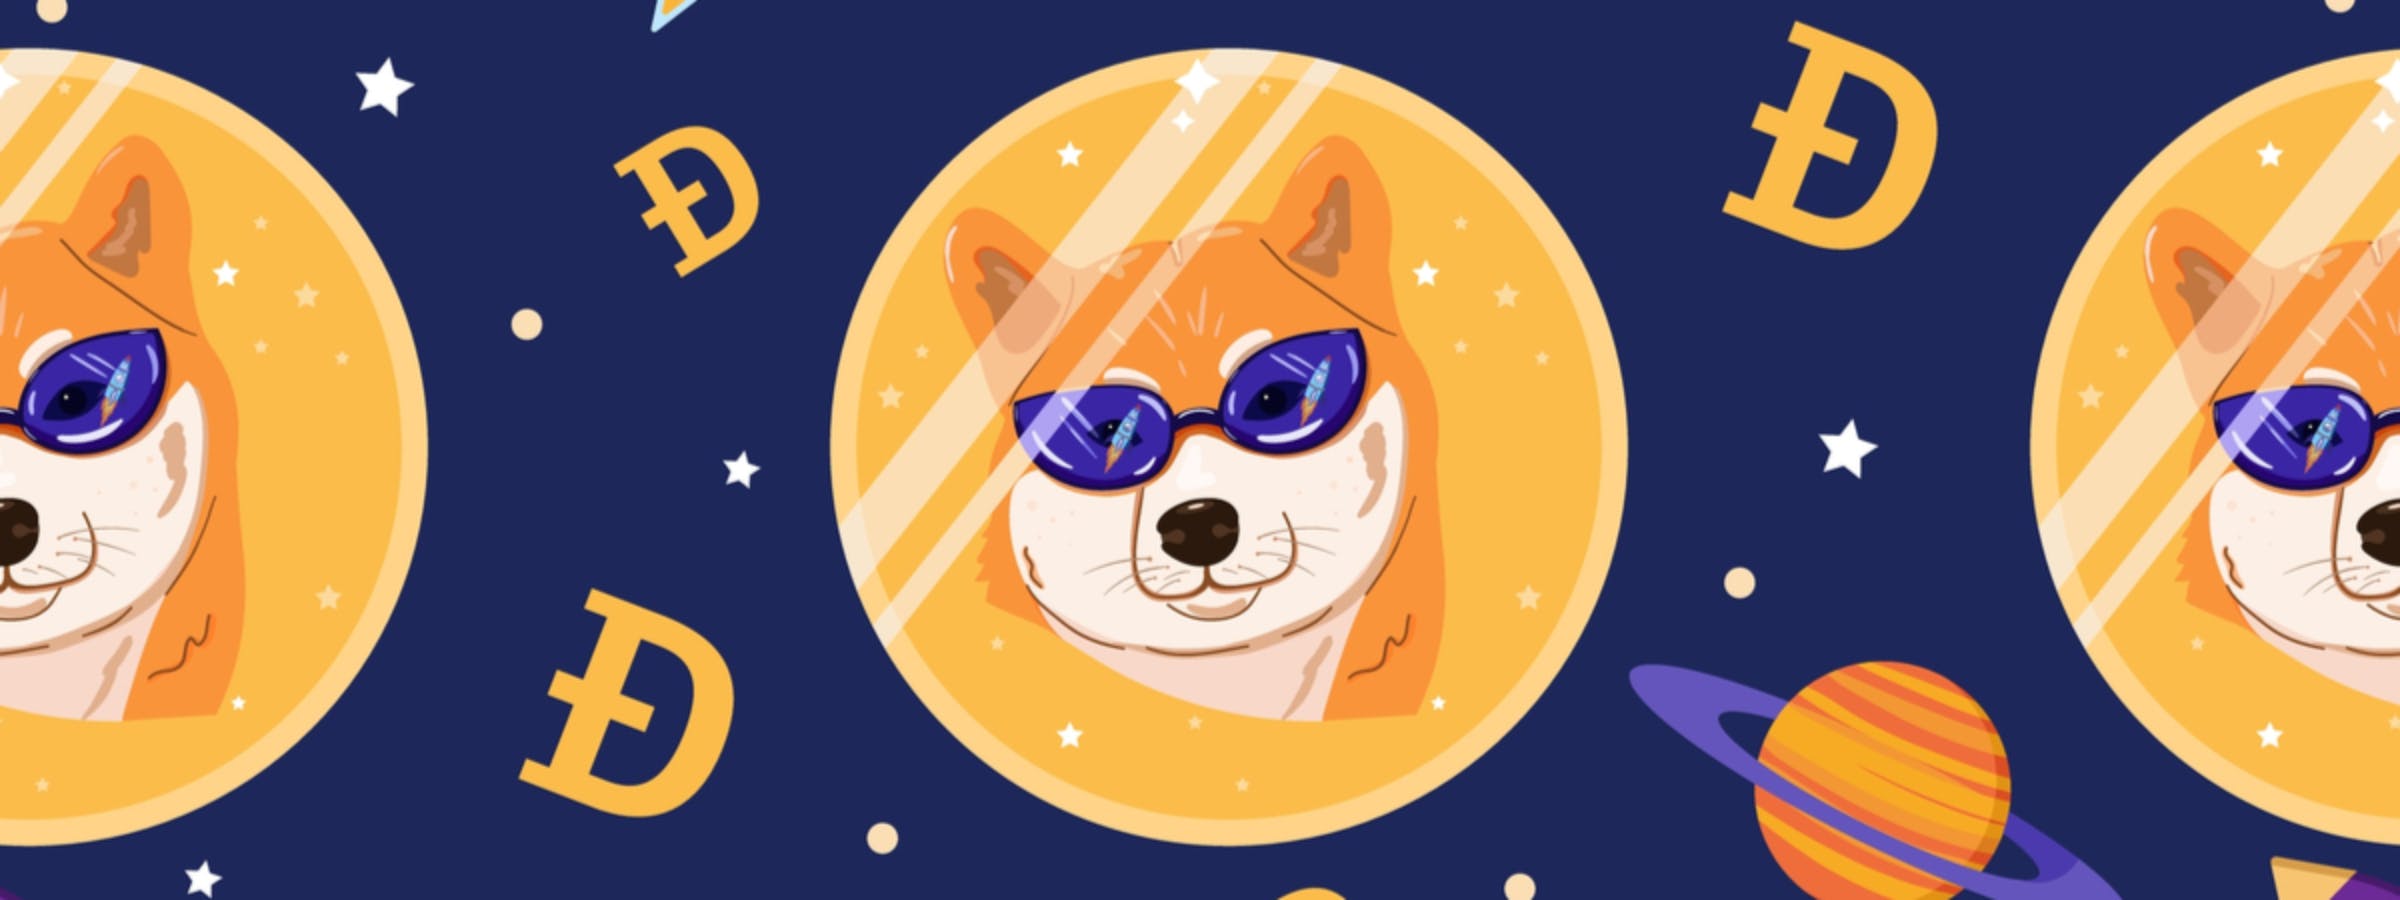 Dogecoin Dice: Roll the Dice with Your Cryptocurrency